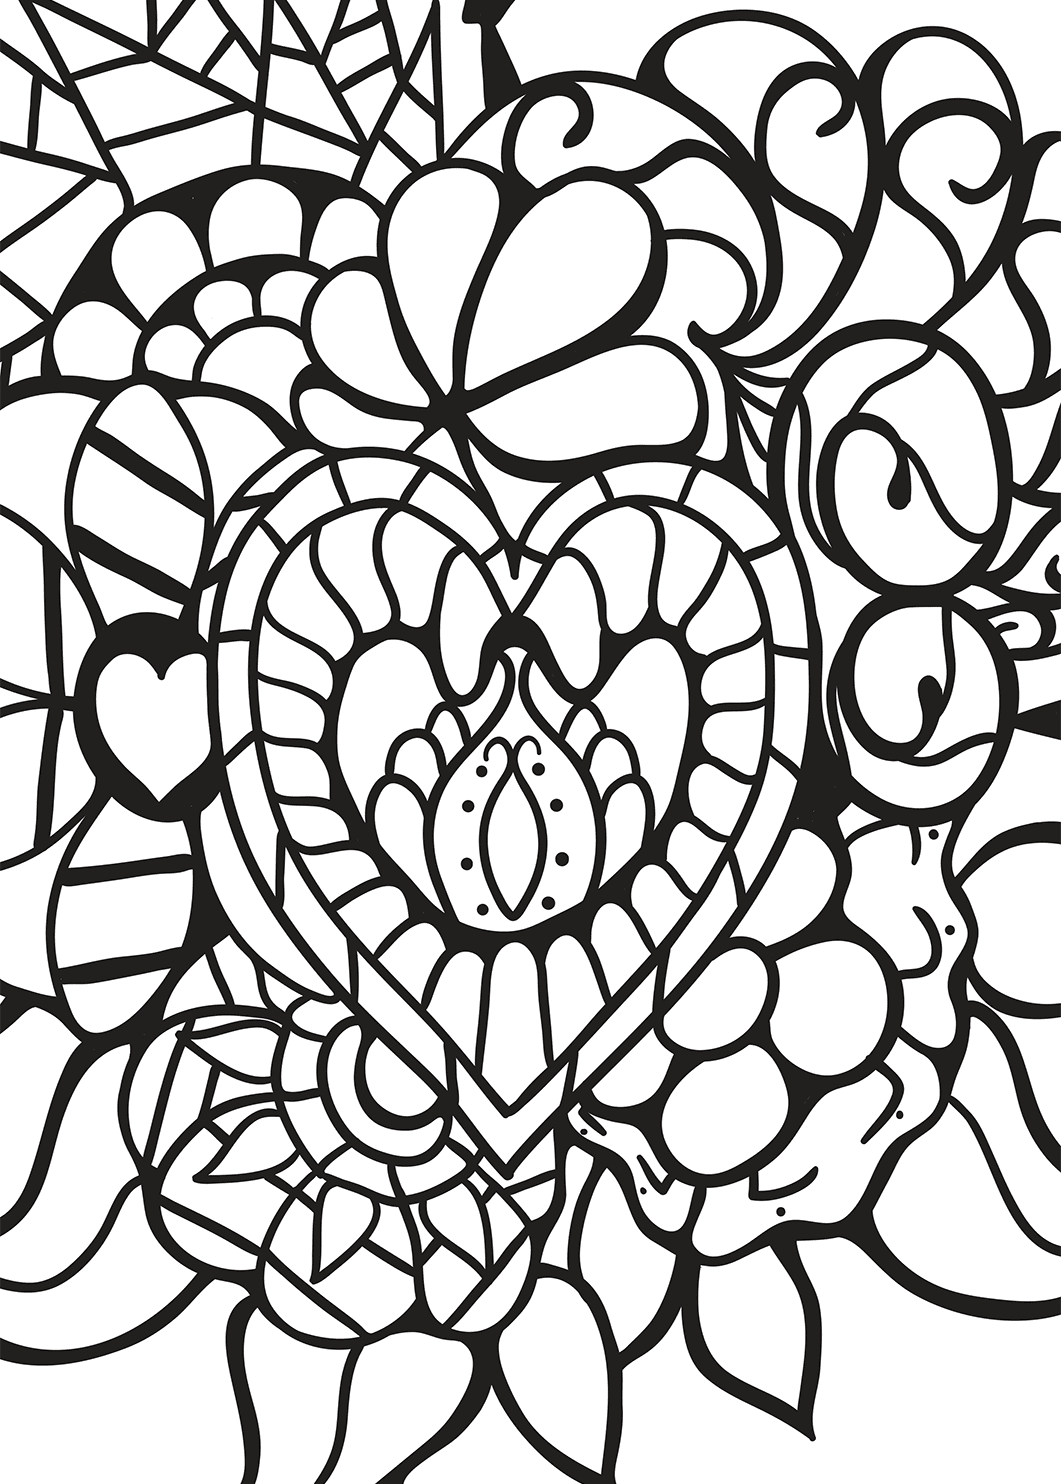 Hearts Coloring Pages for Adults Best Coloring Pages For